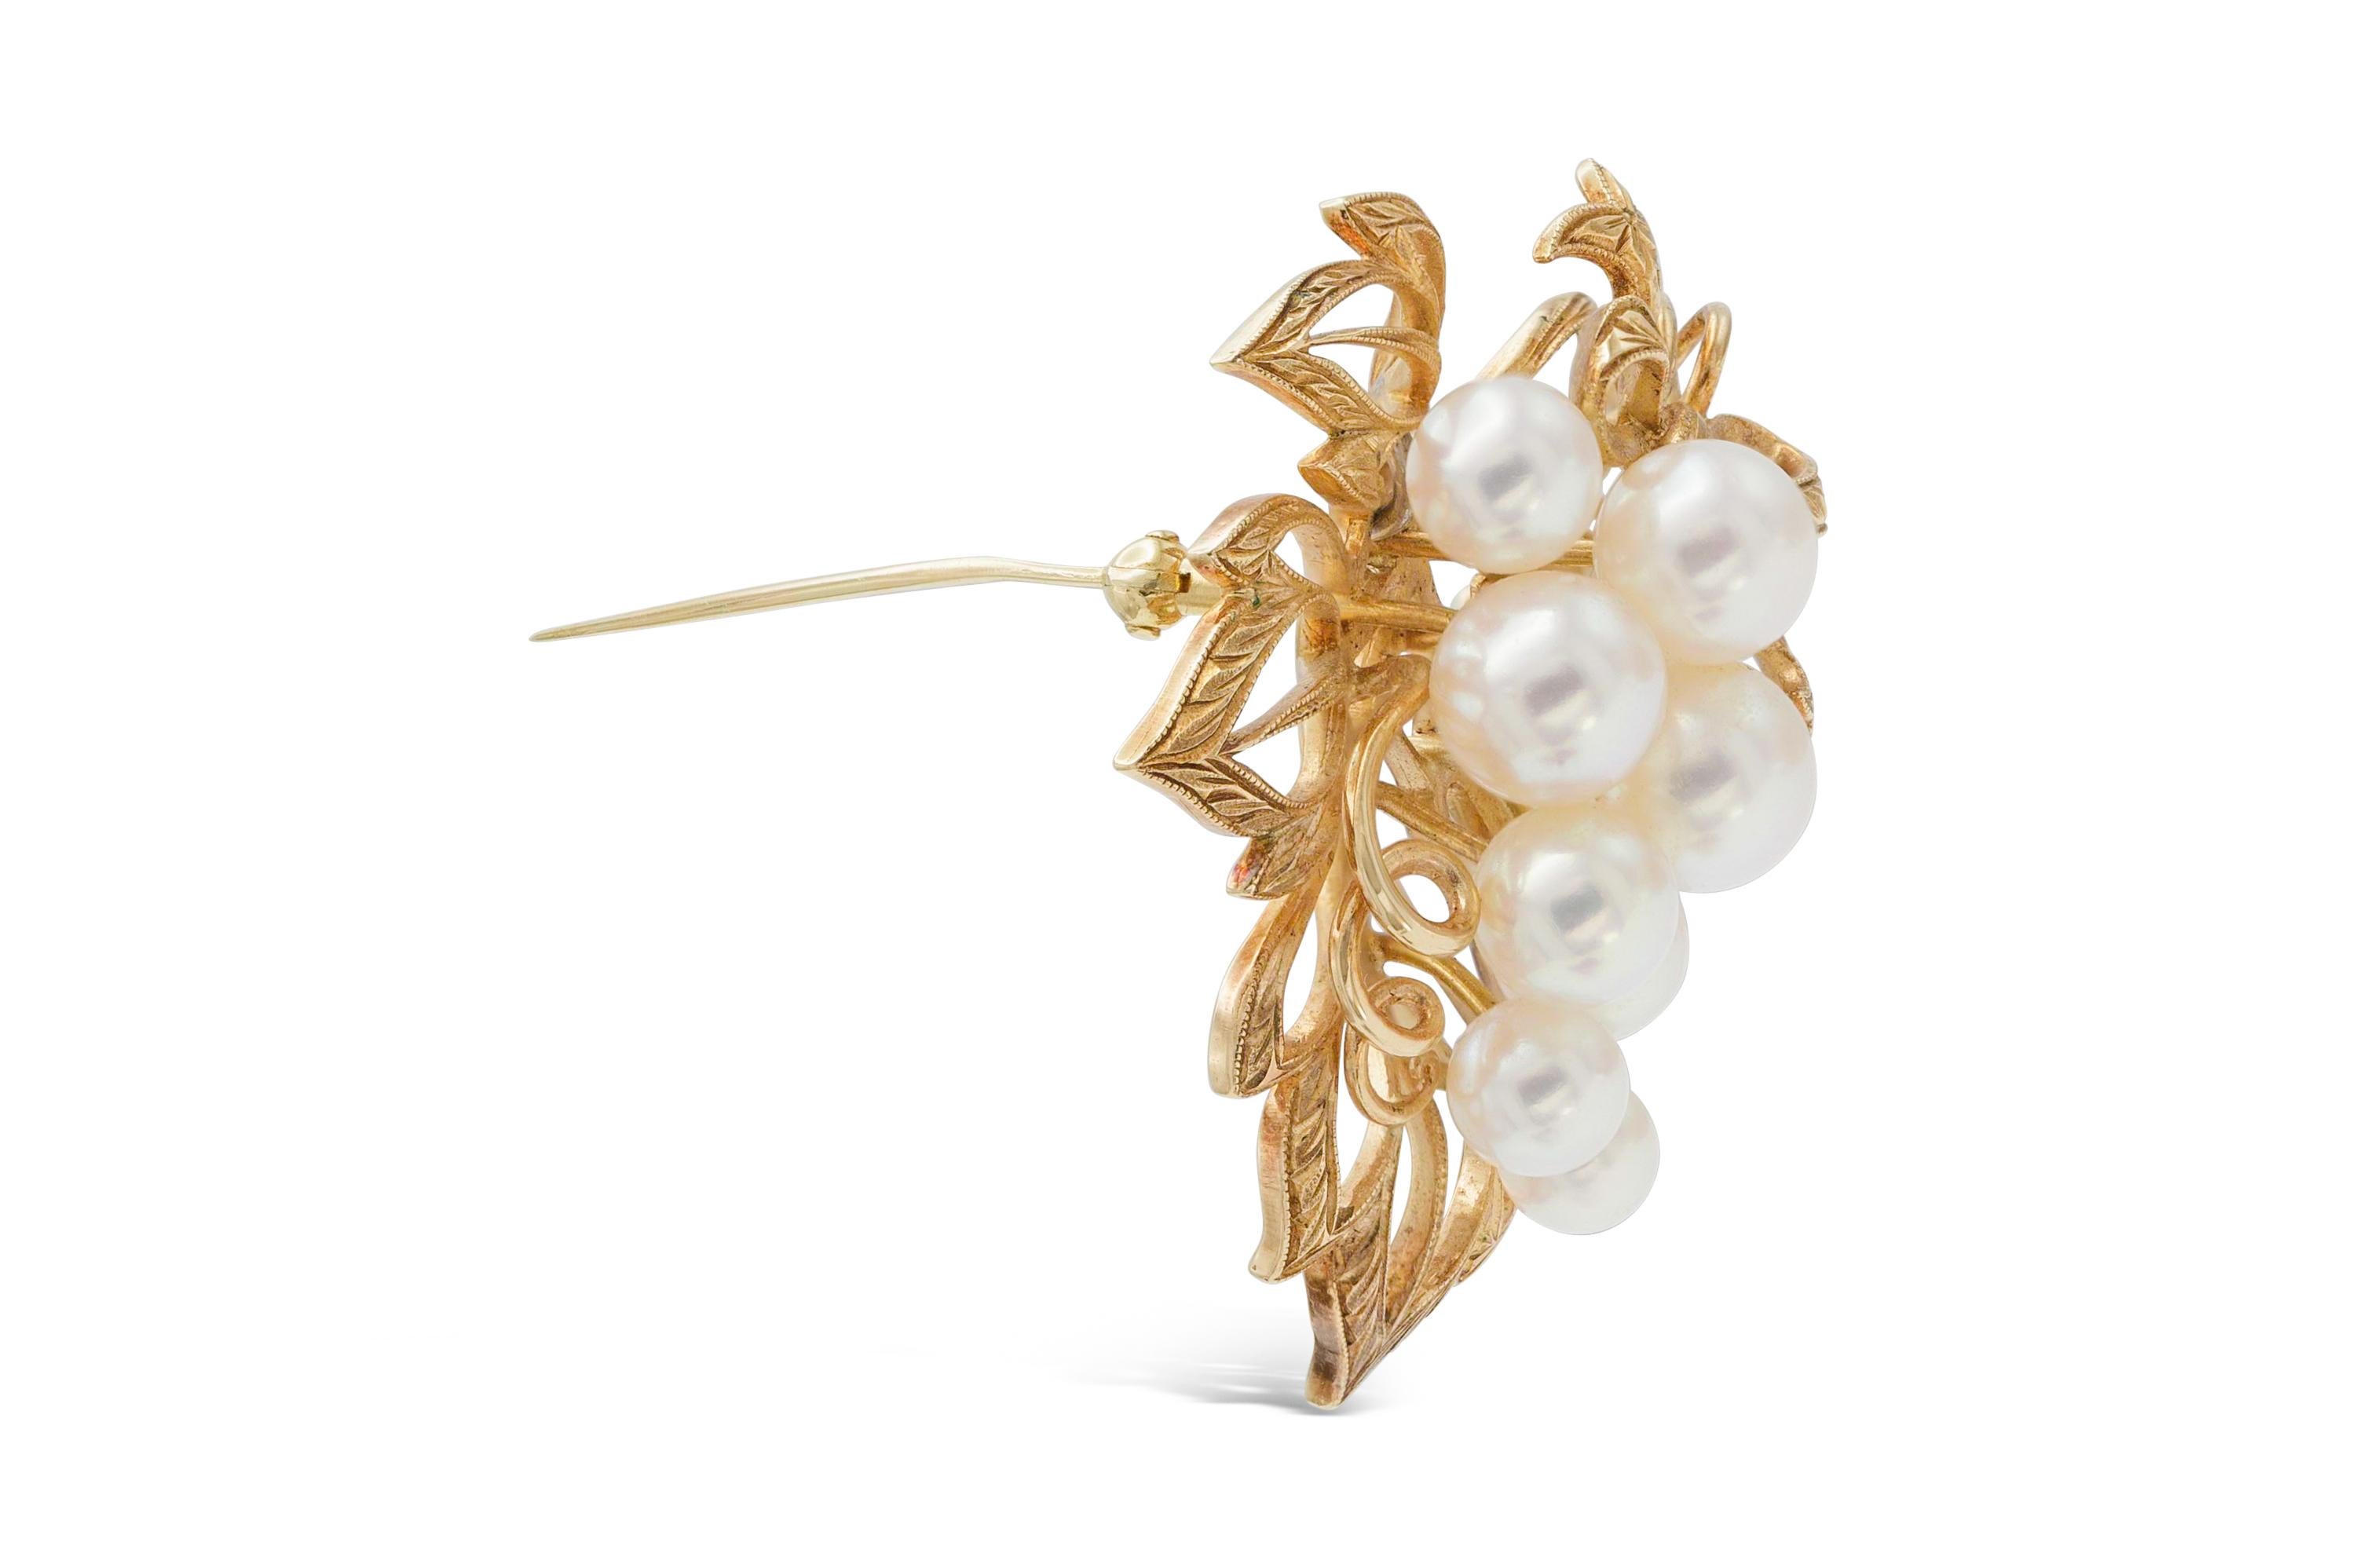 Finely crafted in 14k yellow gold with Japanese Akoya pearls.
Signed by Mikimoto.